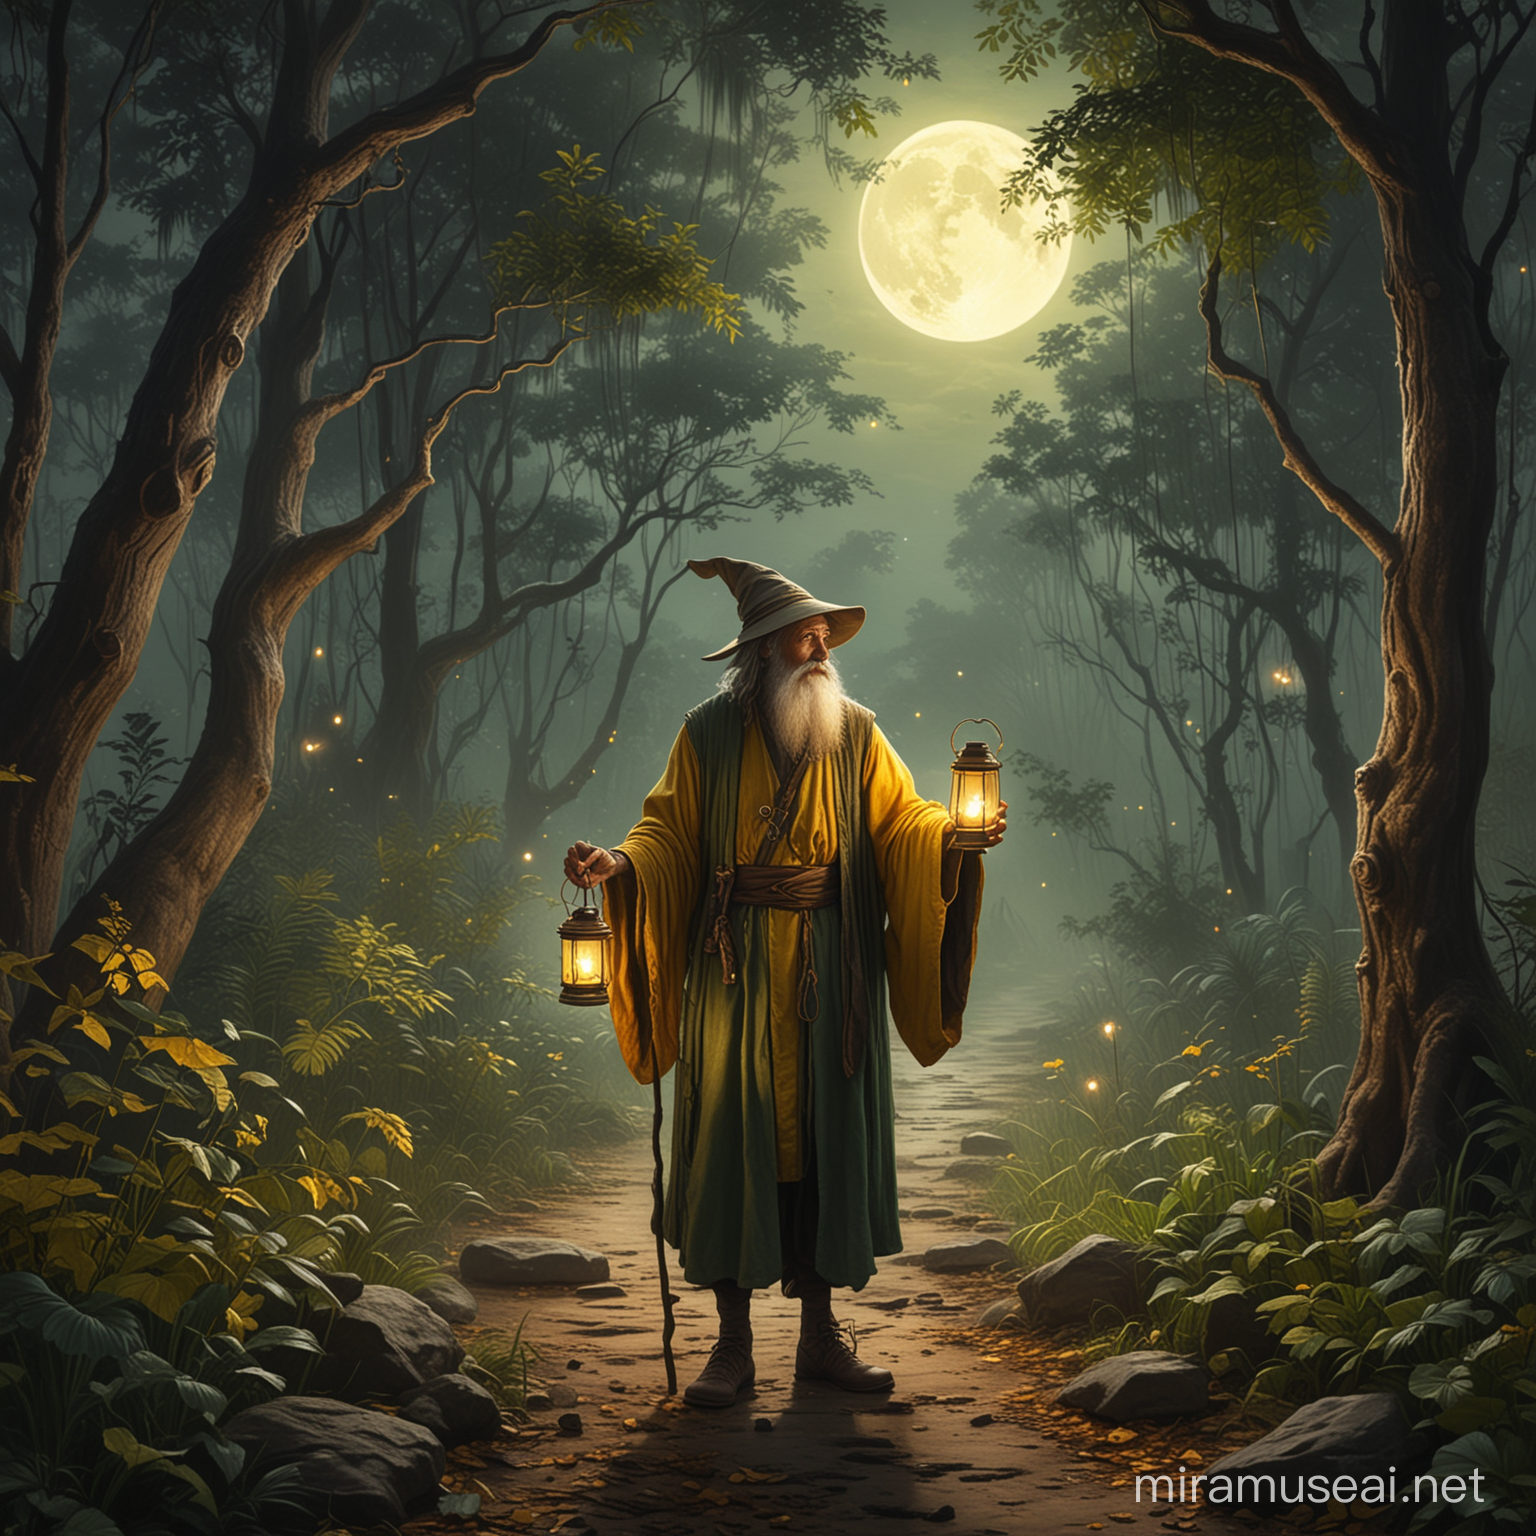 Solitary Wizard with Lantern and Wooden Staff in Enchanted Jungle at Night